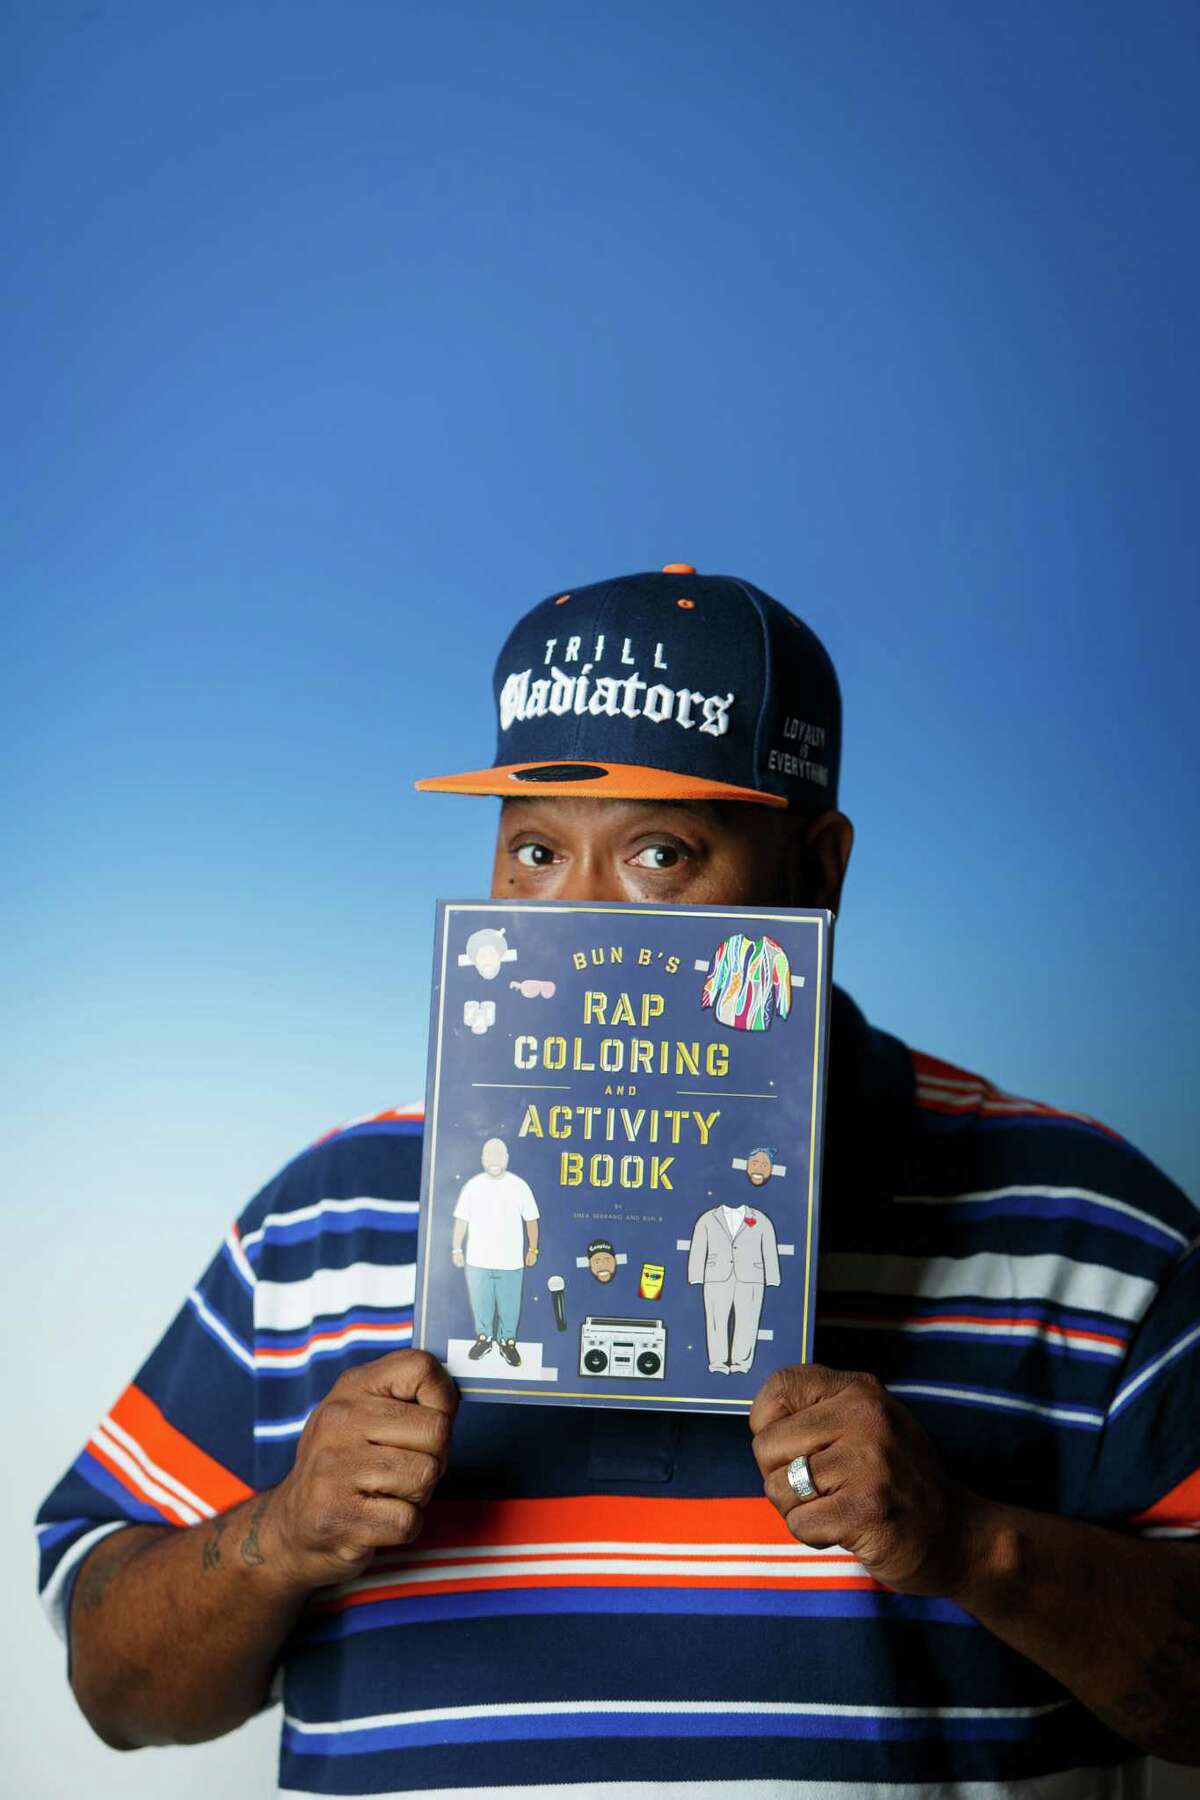 Bun B lends his name, knowledge and his face to "Bun B's Rap Coloring and Activity Book," drawn by Shea Serrano.